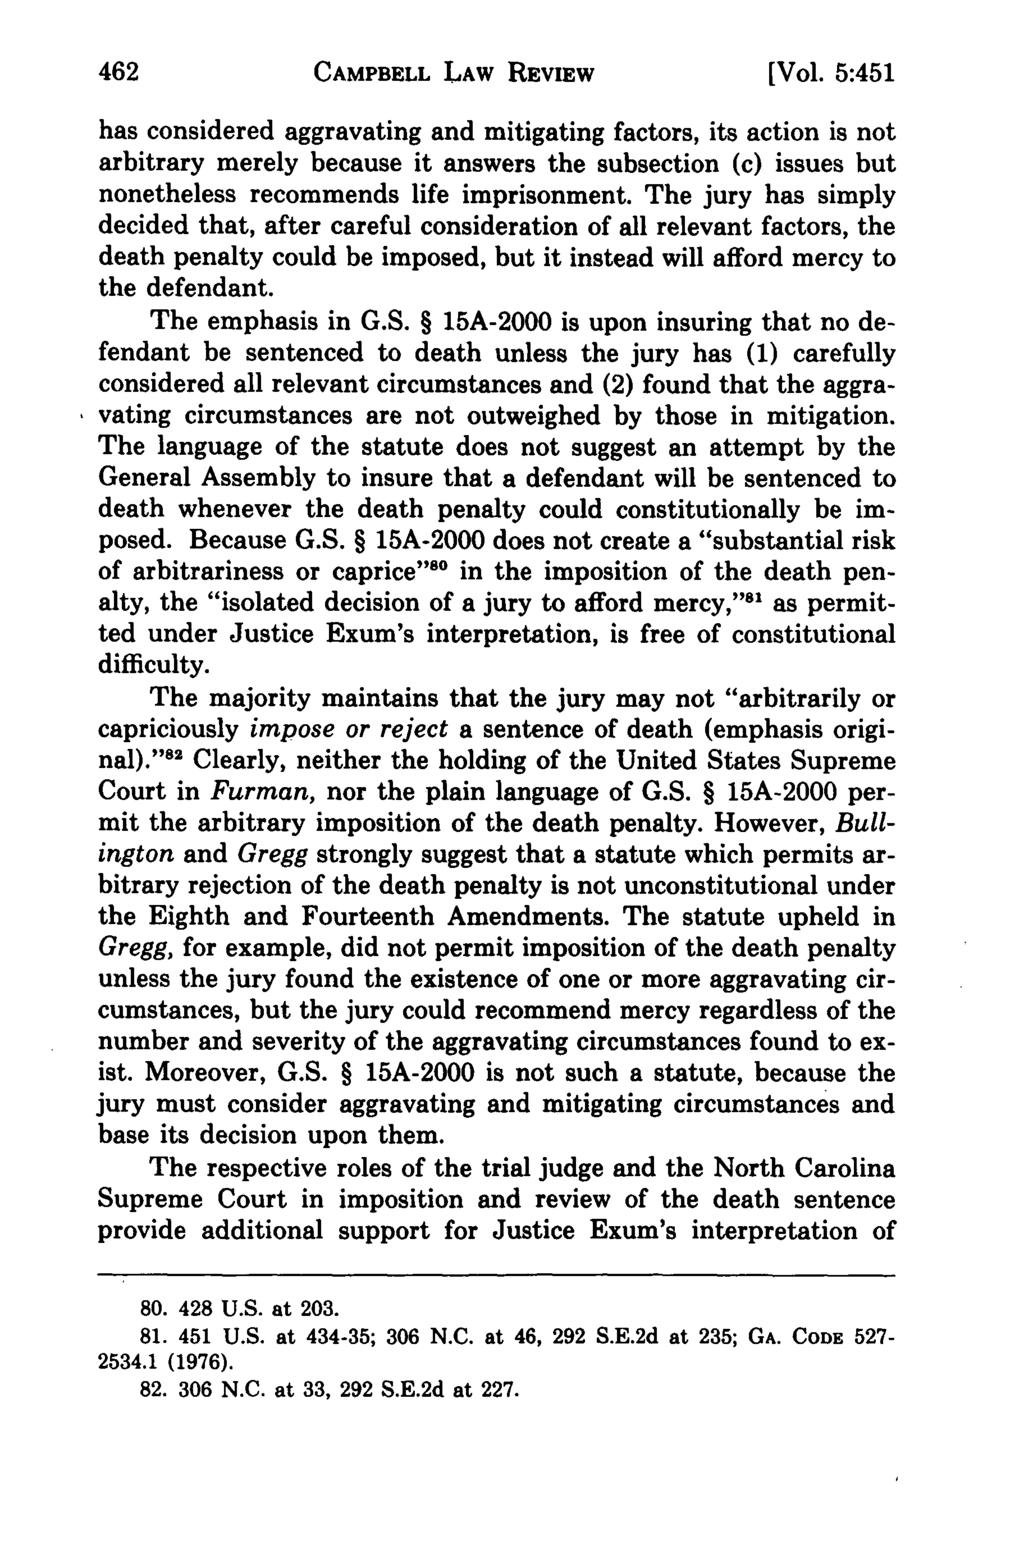 Campbell Law Review, Vol. 5, Iss. 2 [1983], Art. 8 CAMPBELL LAW REVIEW [Vol.